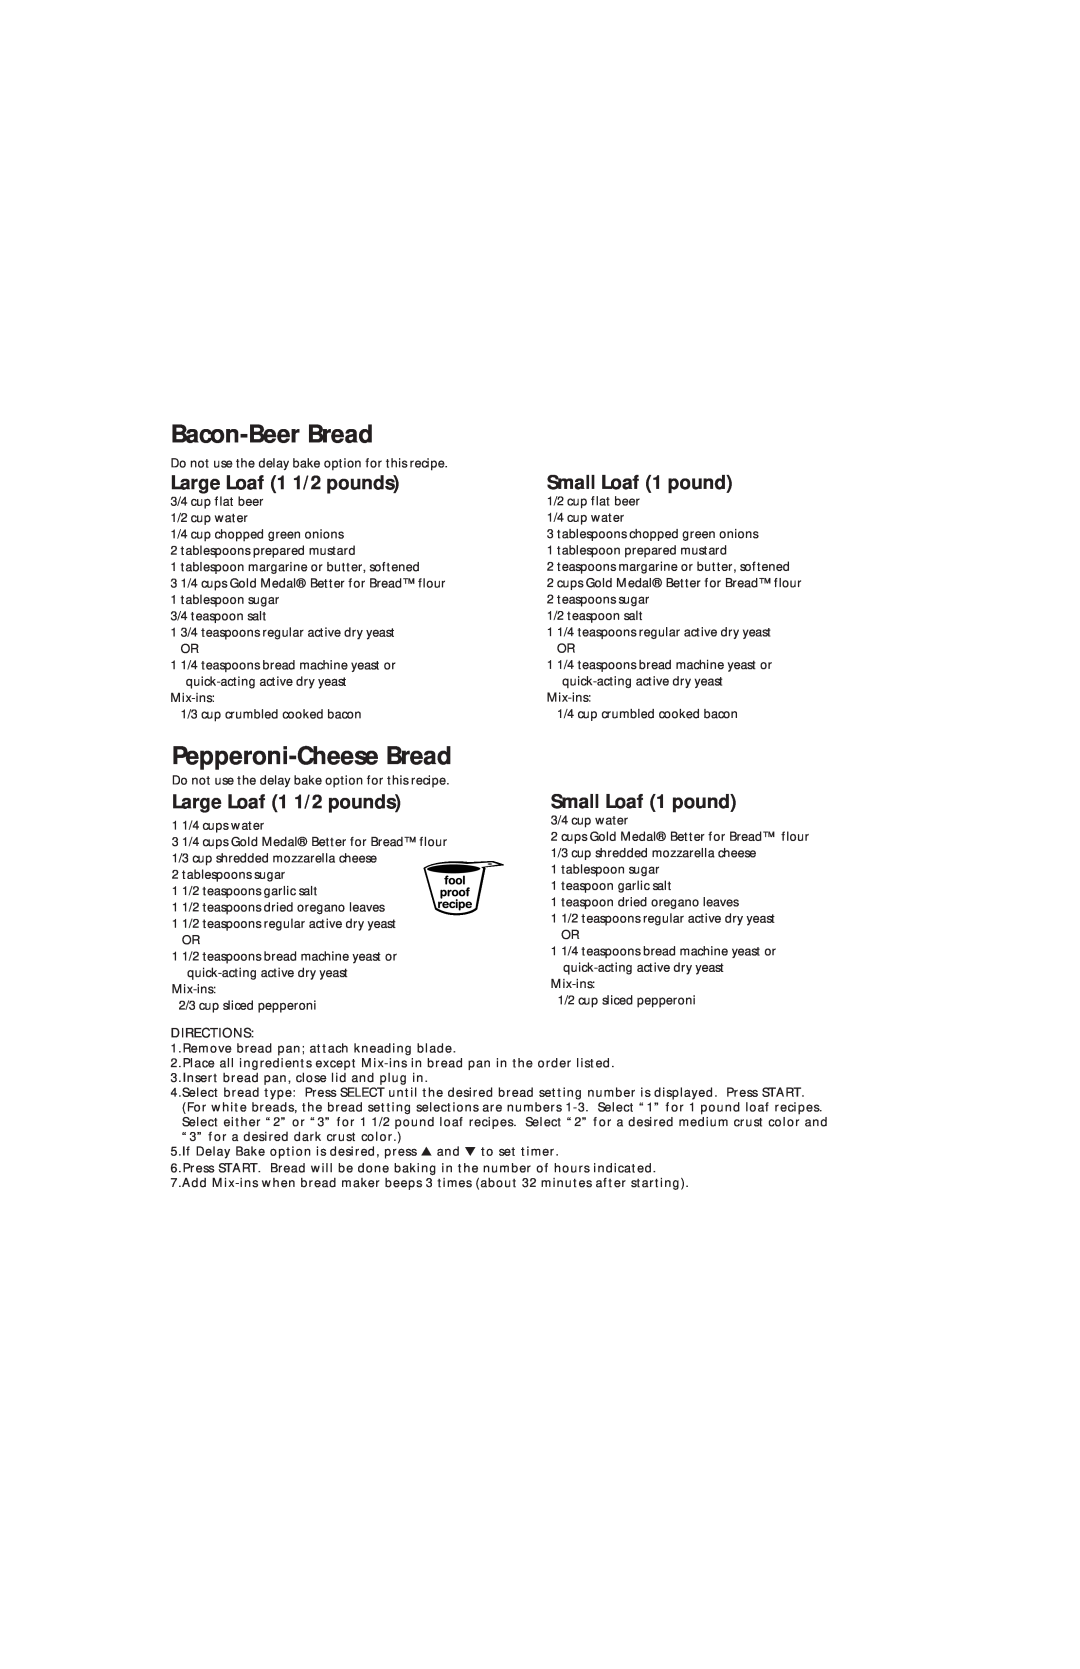 Oster Bread & Dough Maker manual Bacon-BeerBread, Pepperoni-CheeseBread, Large Loaf 1 1/2 pounds, Small Loaf 1 pound 